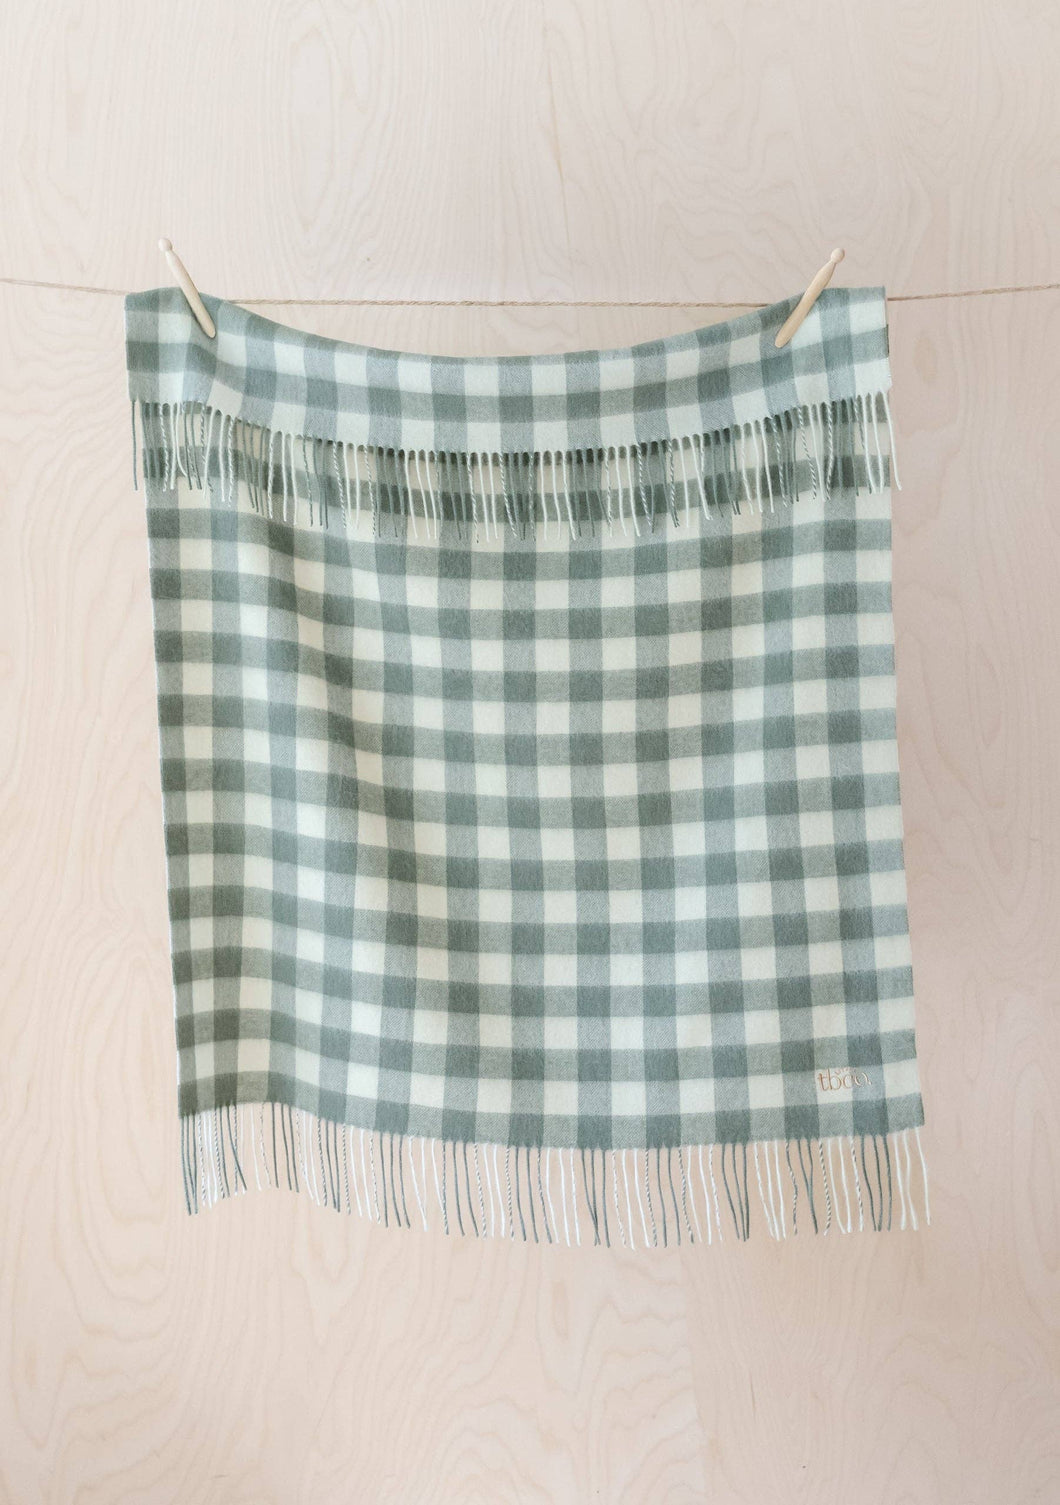 Super Soft Lambswool Baby Blanket in Sage Gingham